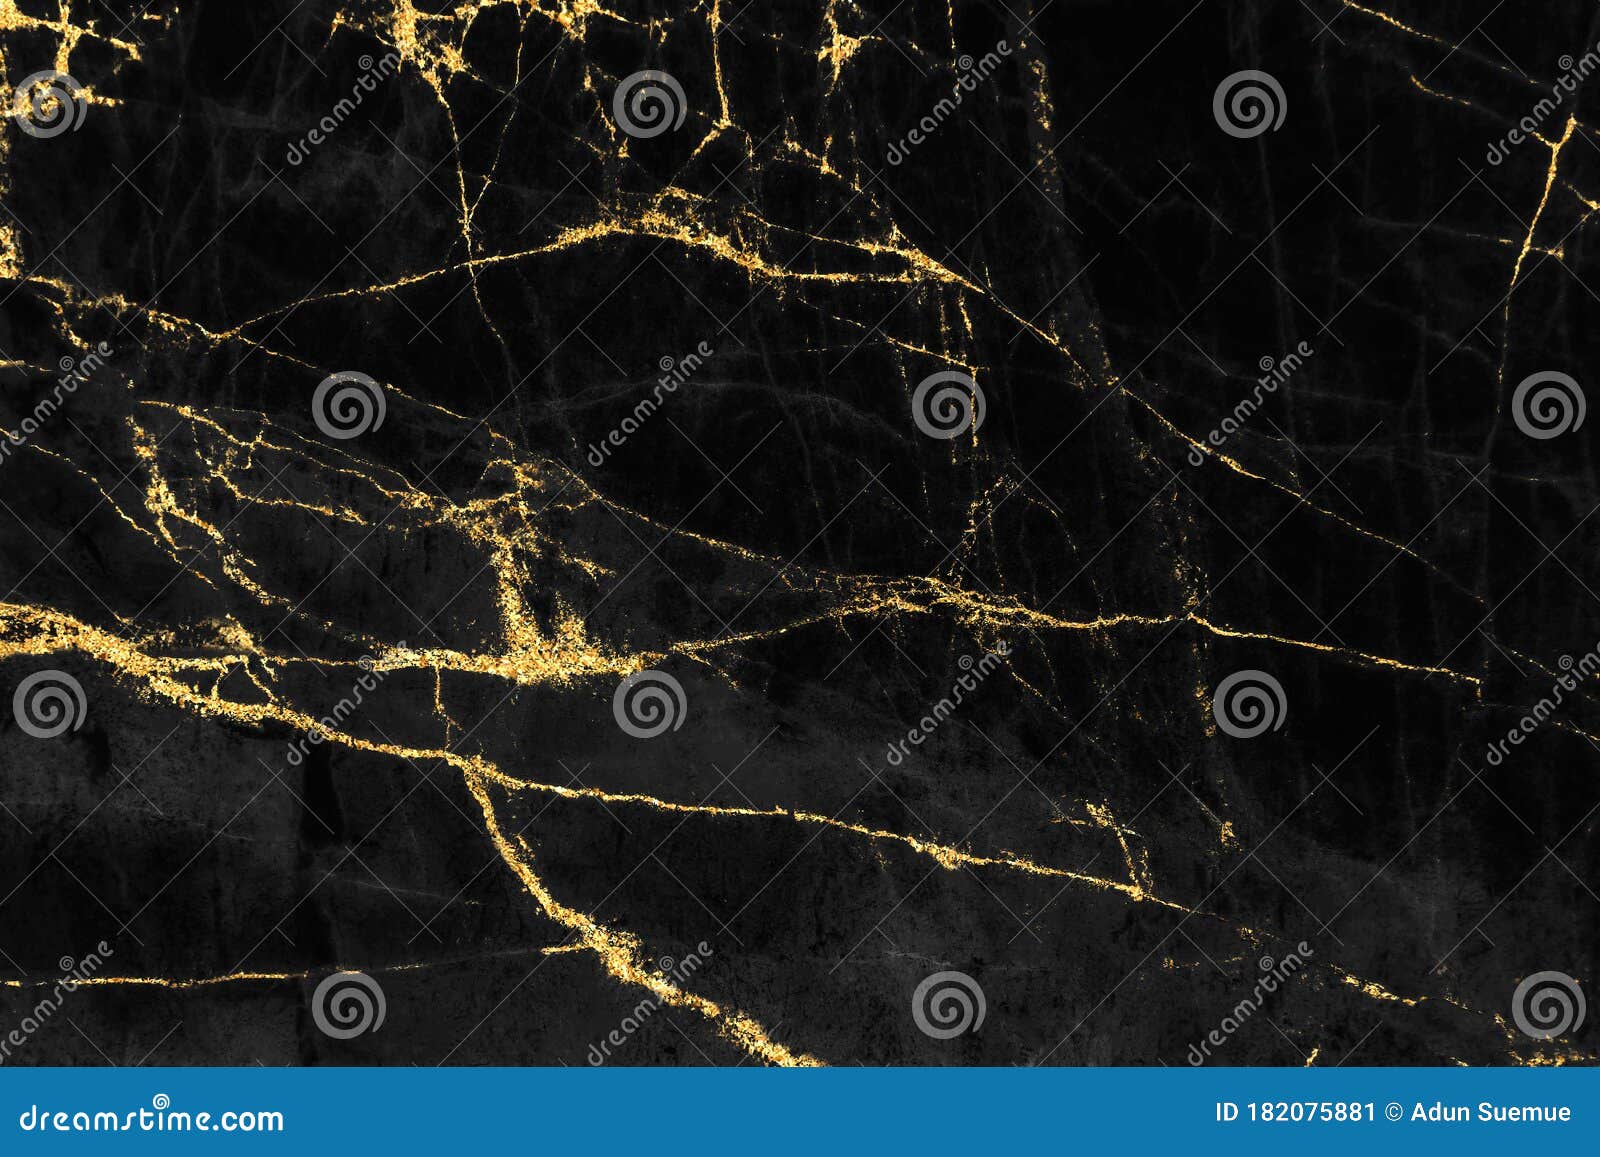 Buy Black Marble Pattern Wallpaper With Gold Veins Digital Online in India   Etsy